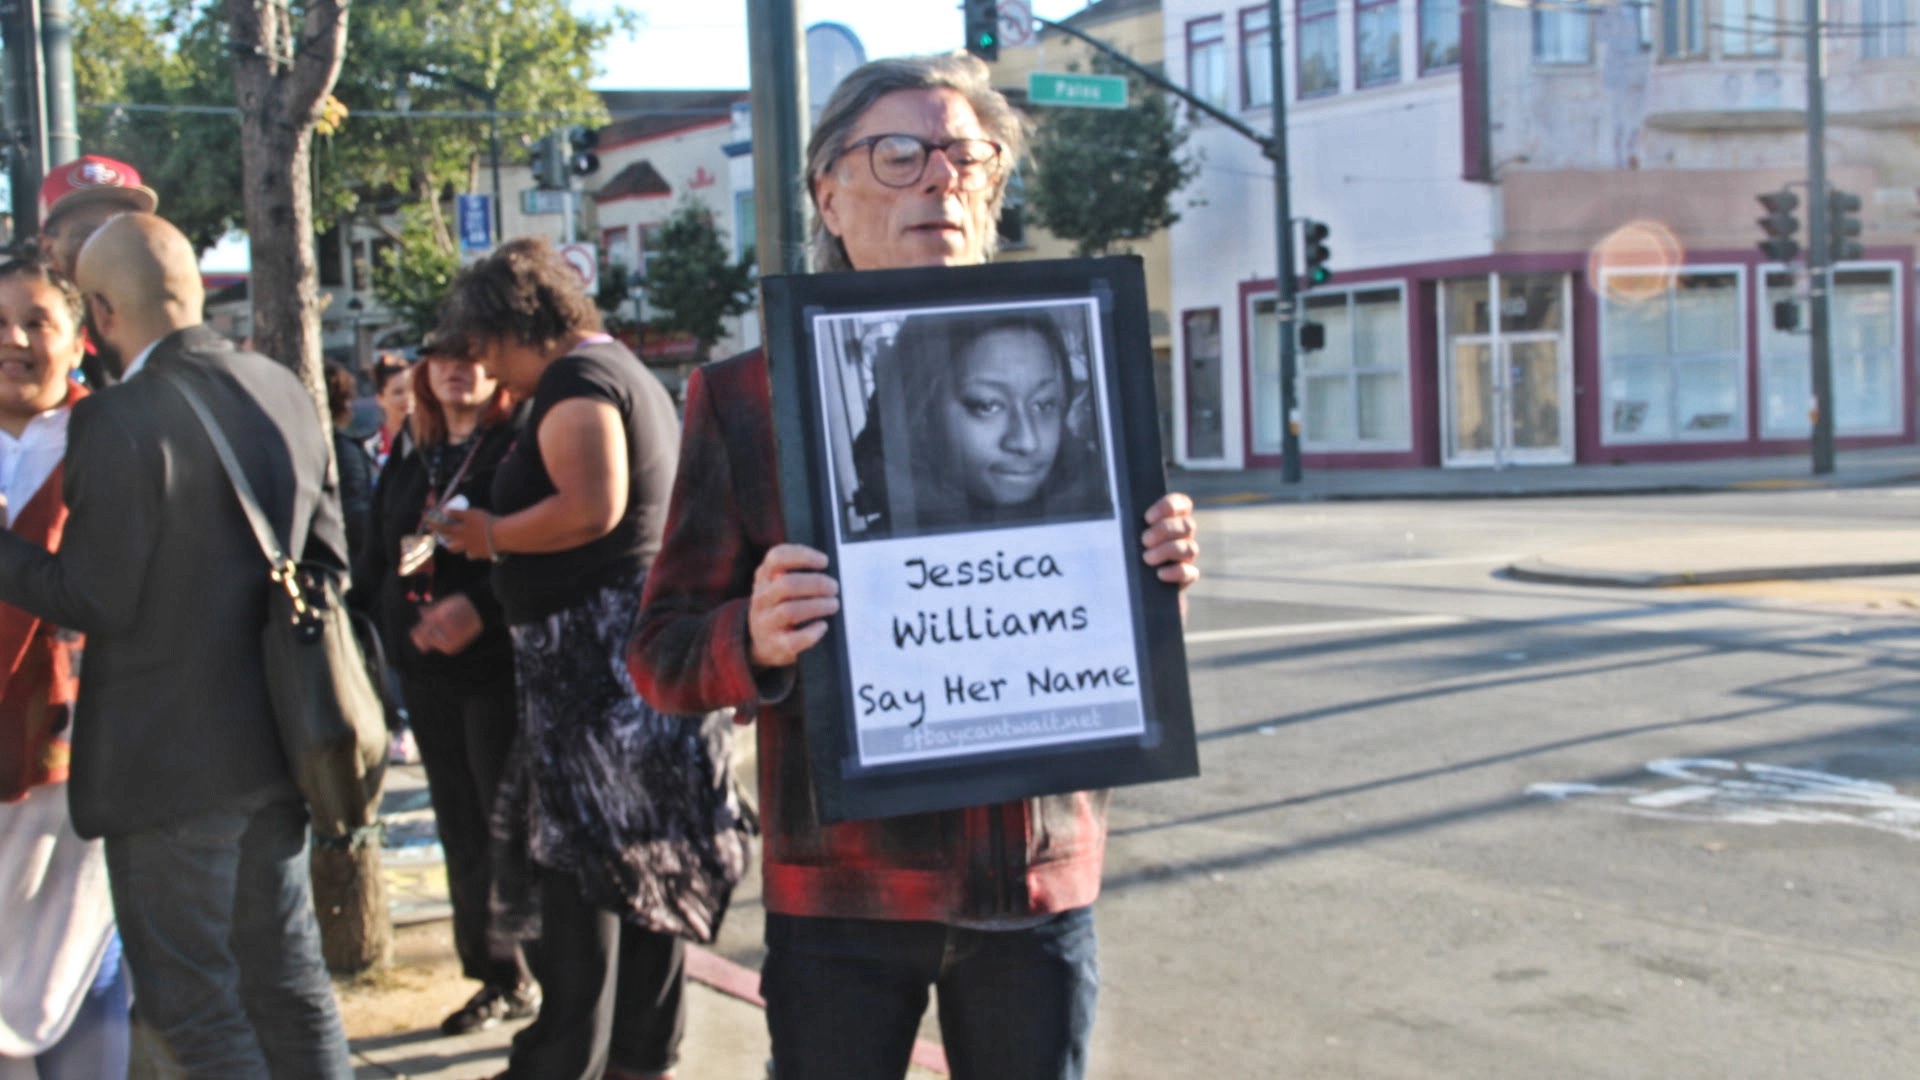 A protestor holds a photo of Jessica William, provided by her family. Photo by Sana Saleem